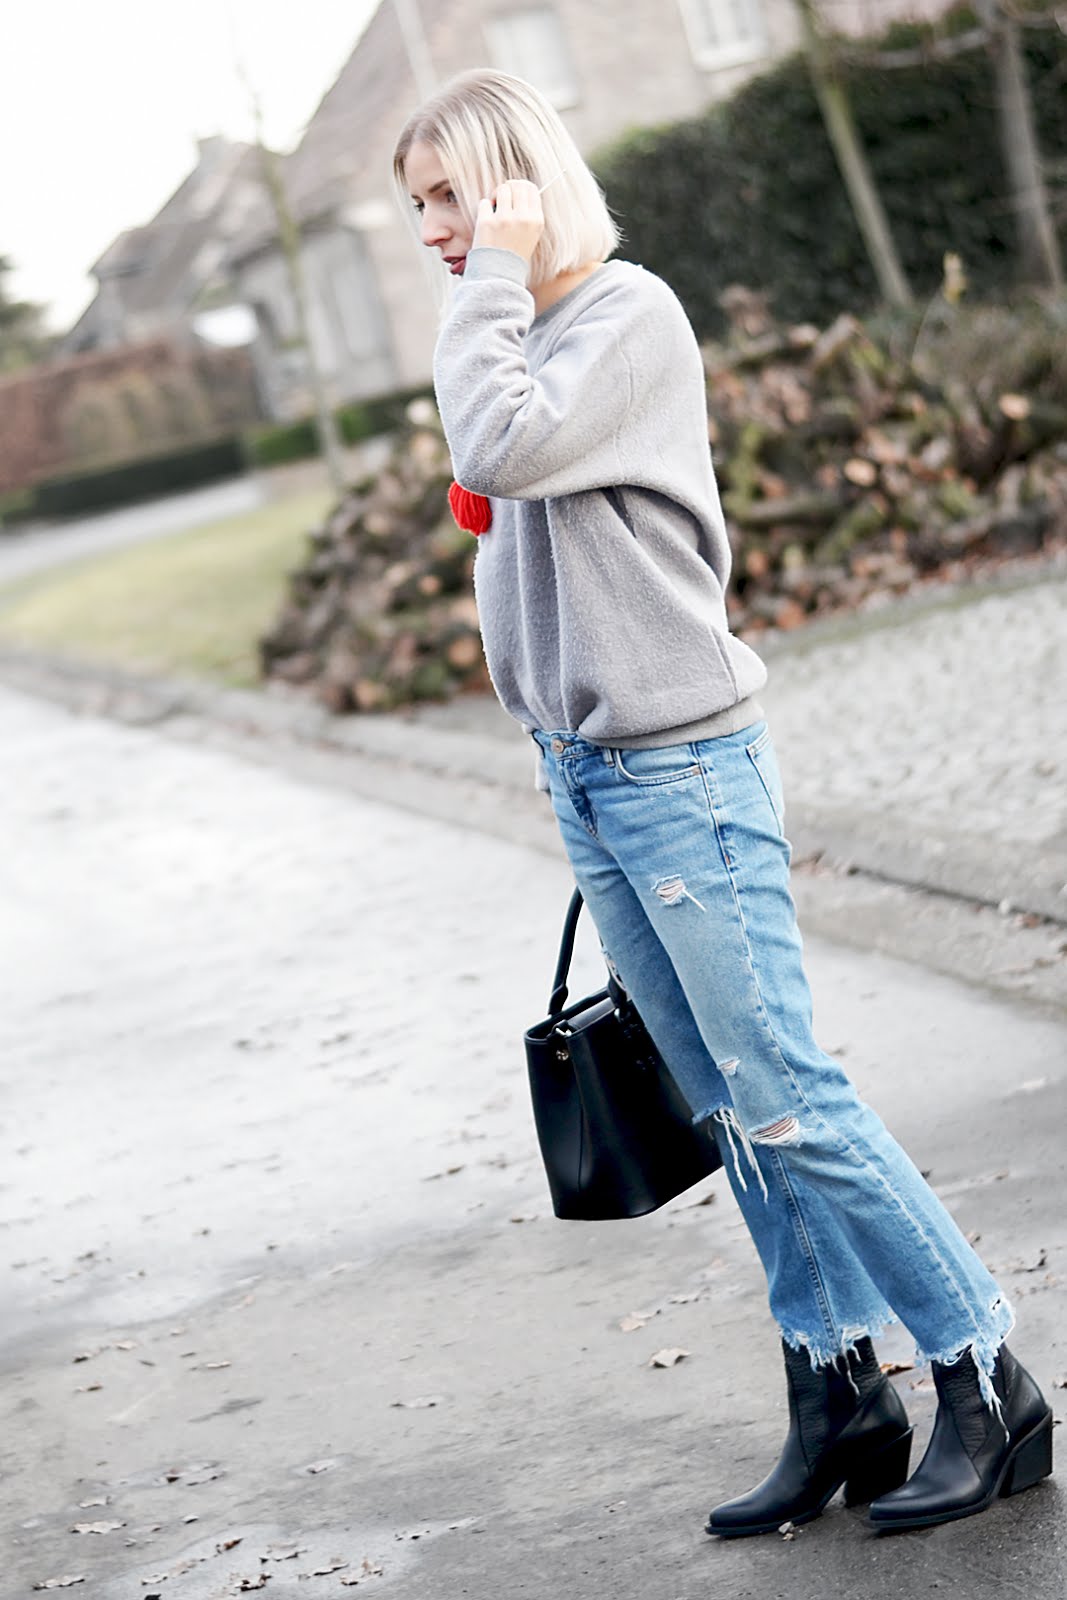 Beauty & bobs sweater, mickey mouse, marc b bag, bald. boots, mango ripped jeans